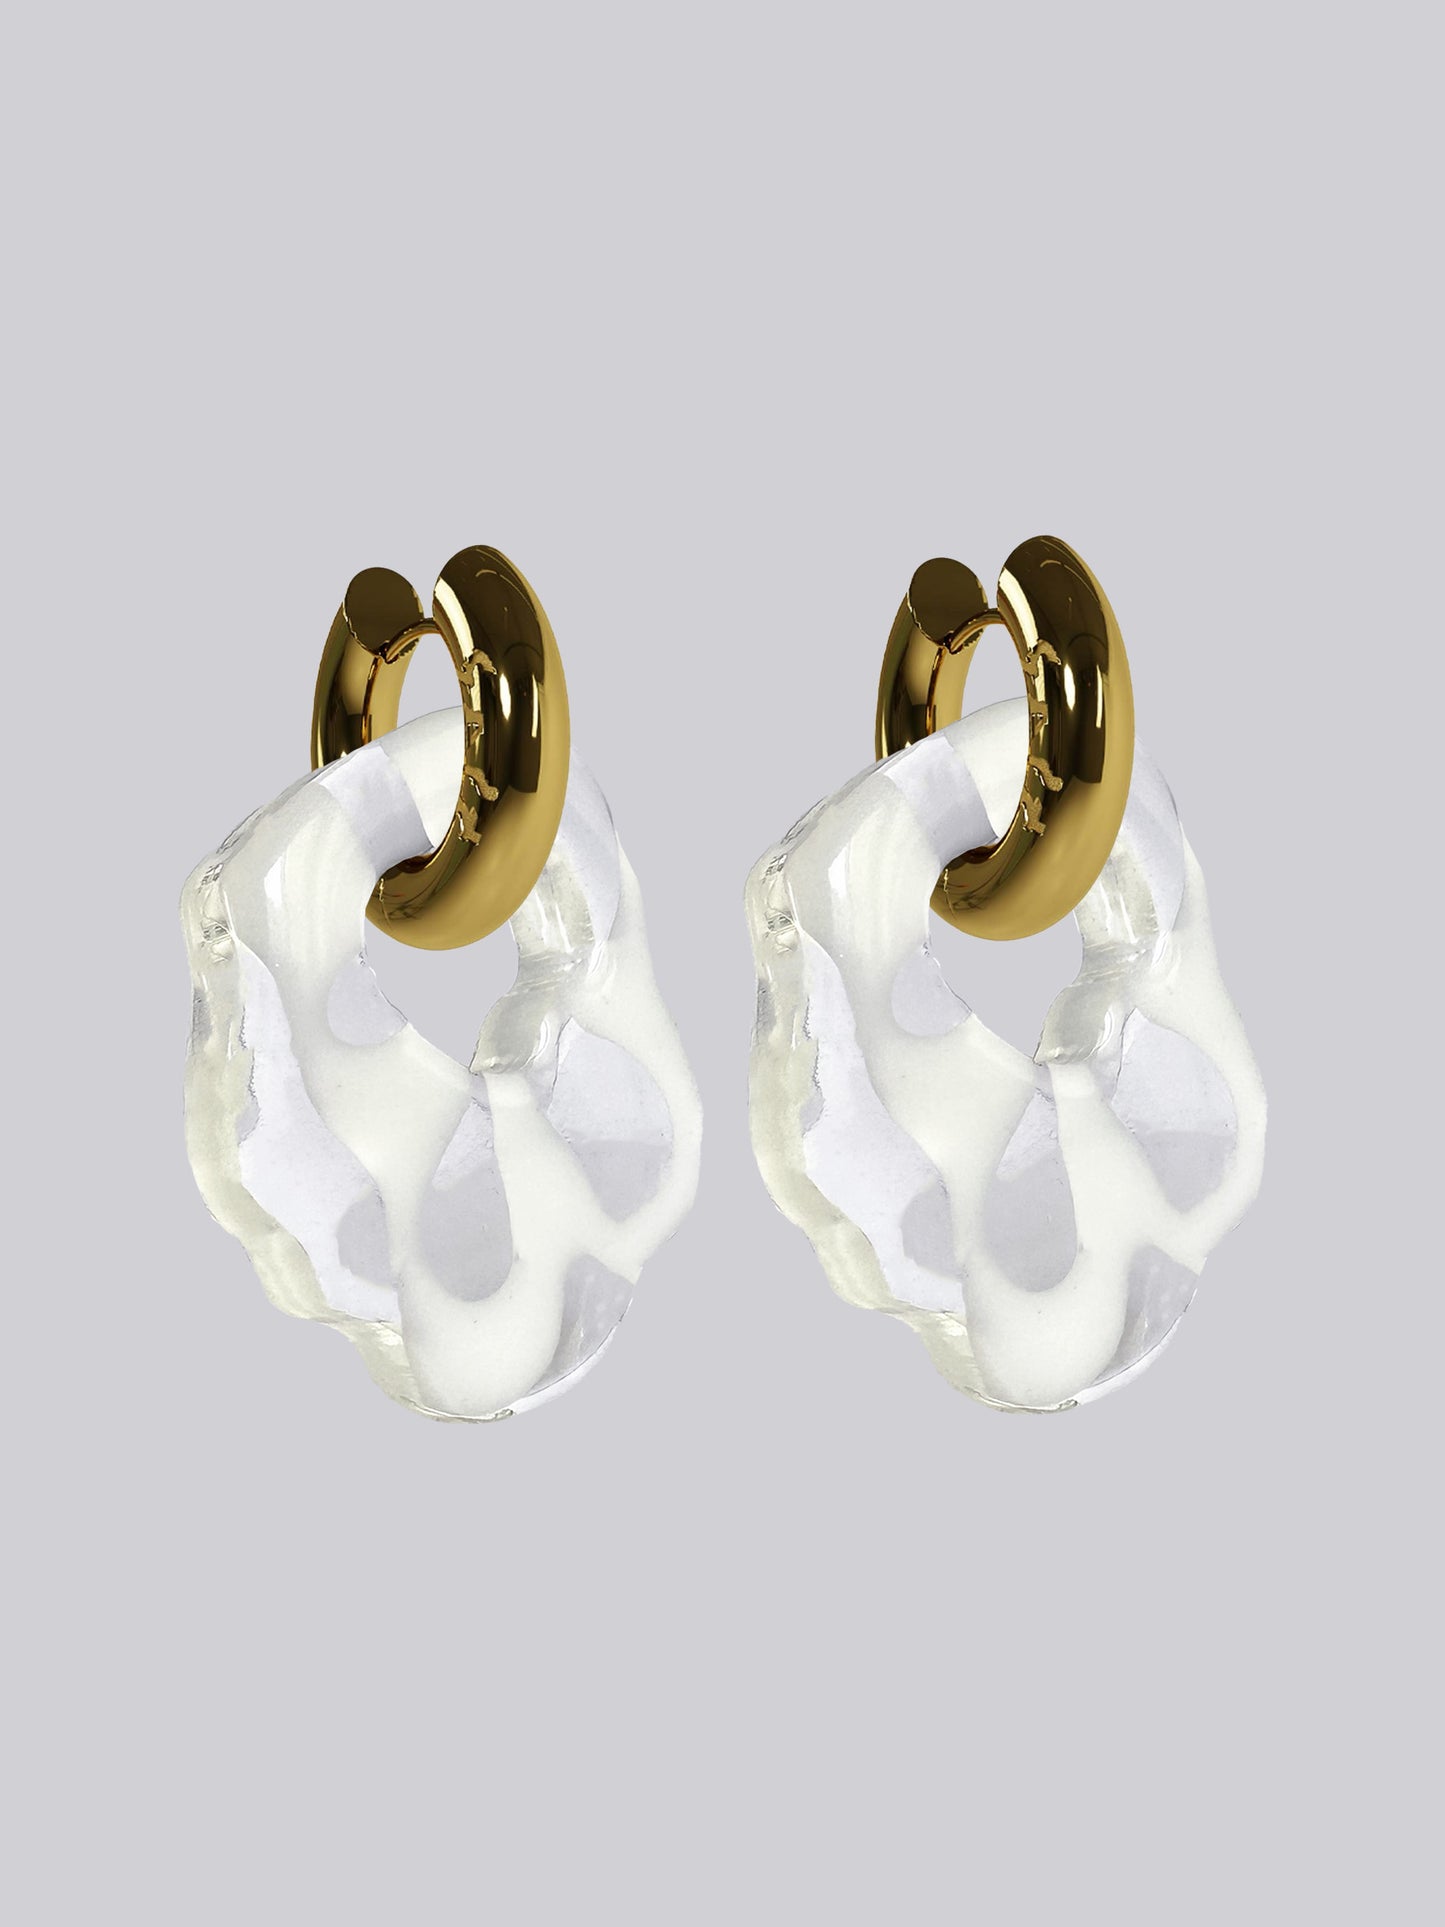 Abe FLWR whi gold earring (pair)